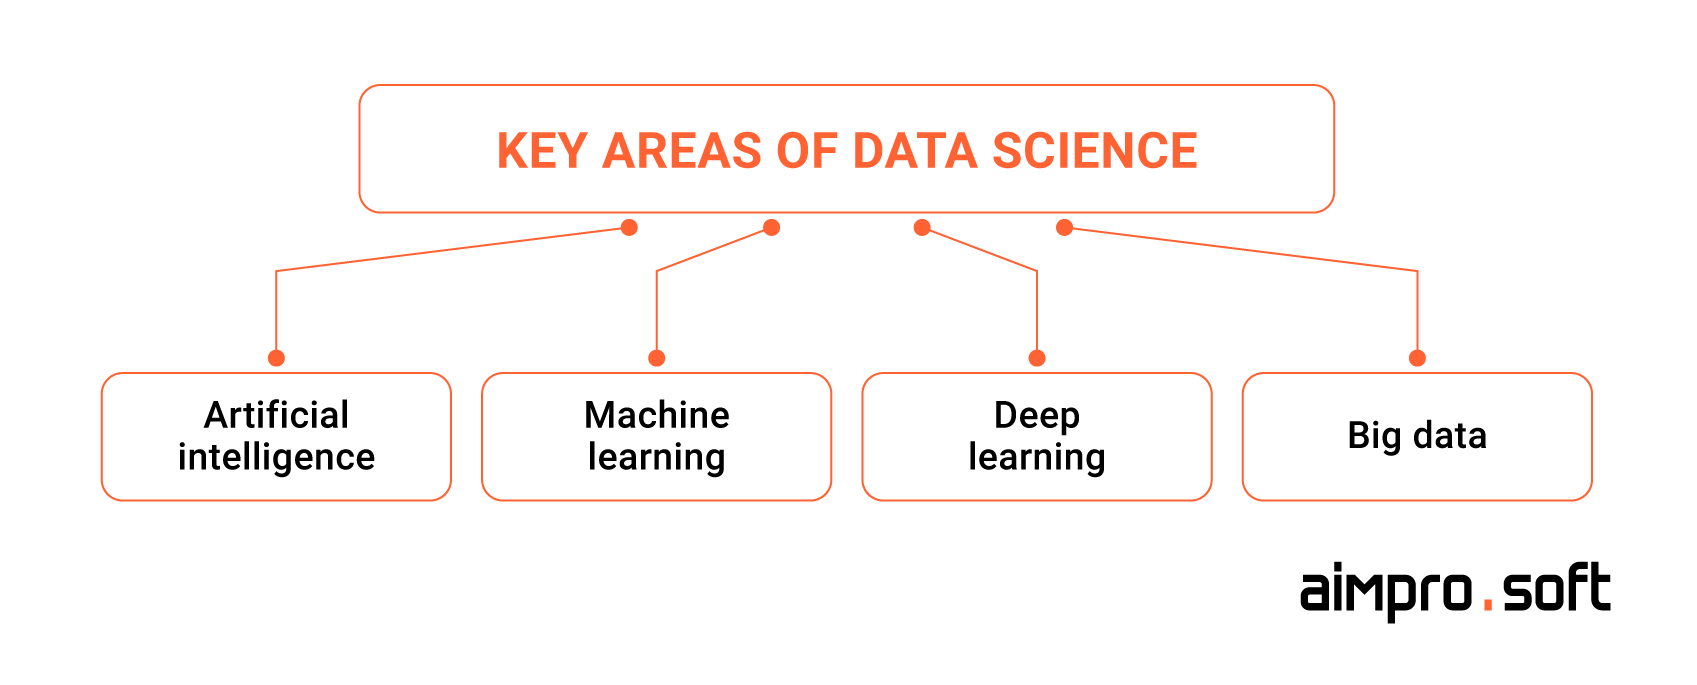 Key areas of data science